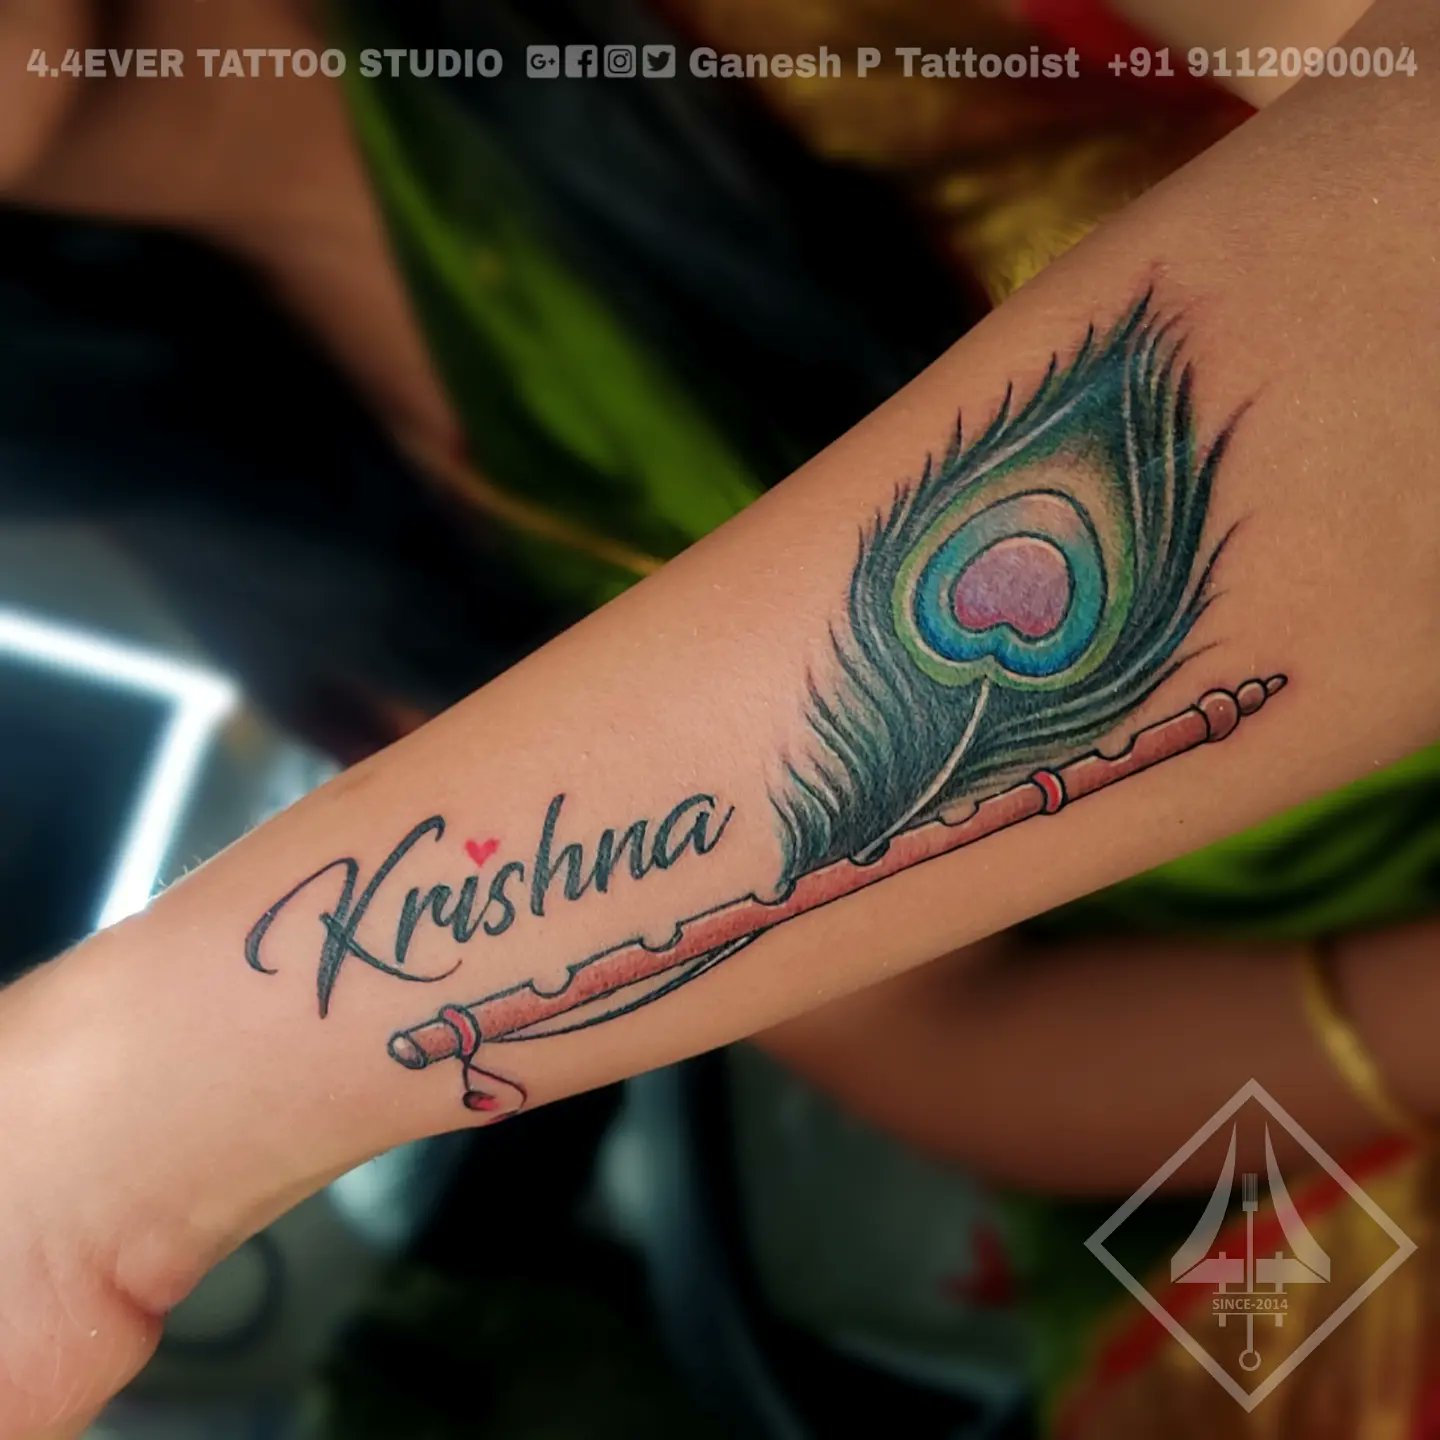 Aggregate 83+ about krishna flute with peacock feather tattoo unmissable -  .vn